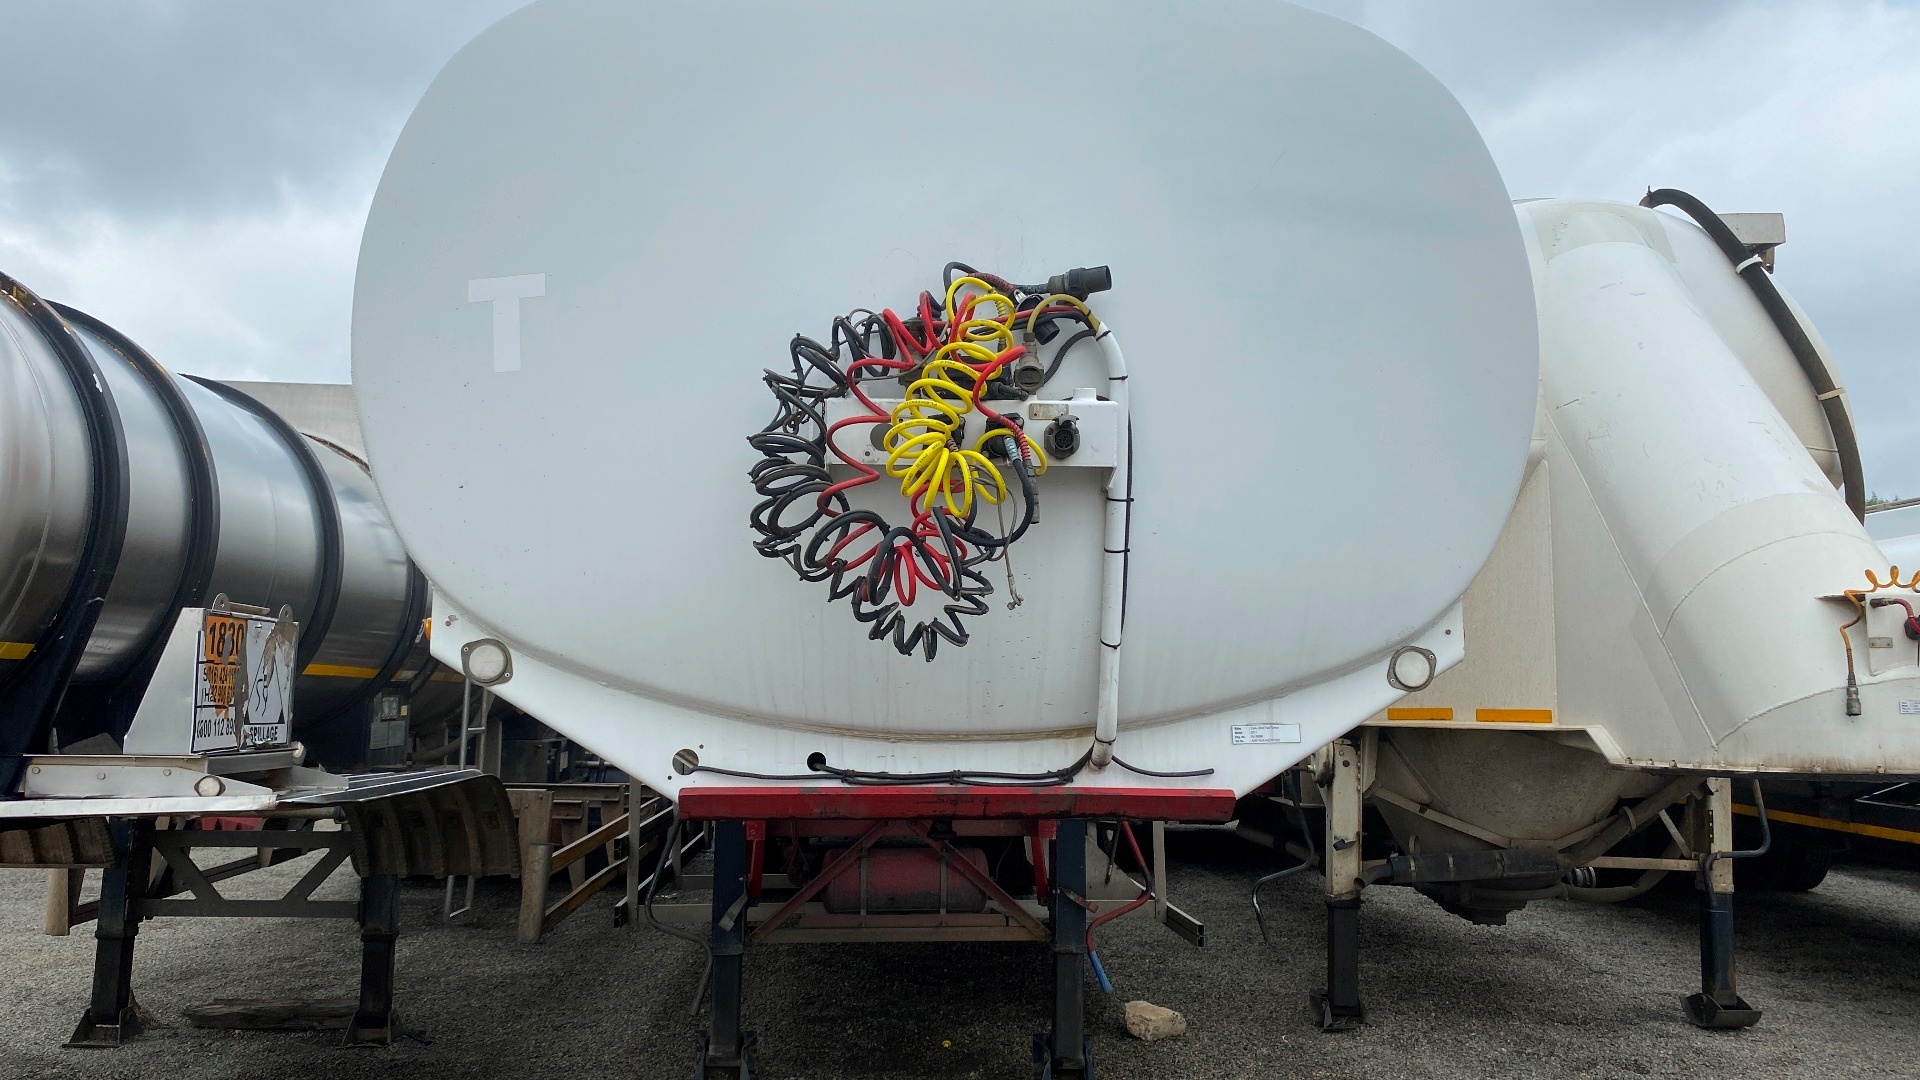 Tank Clinic Fuel tanker 2011   Tank Clinic 47 000 Litres Fuel Tanker 2011 for sale by Manmar Truck And Trailer | Truck & Trailer Marketplaces